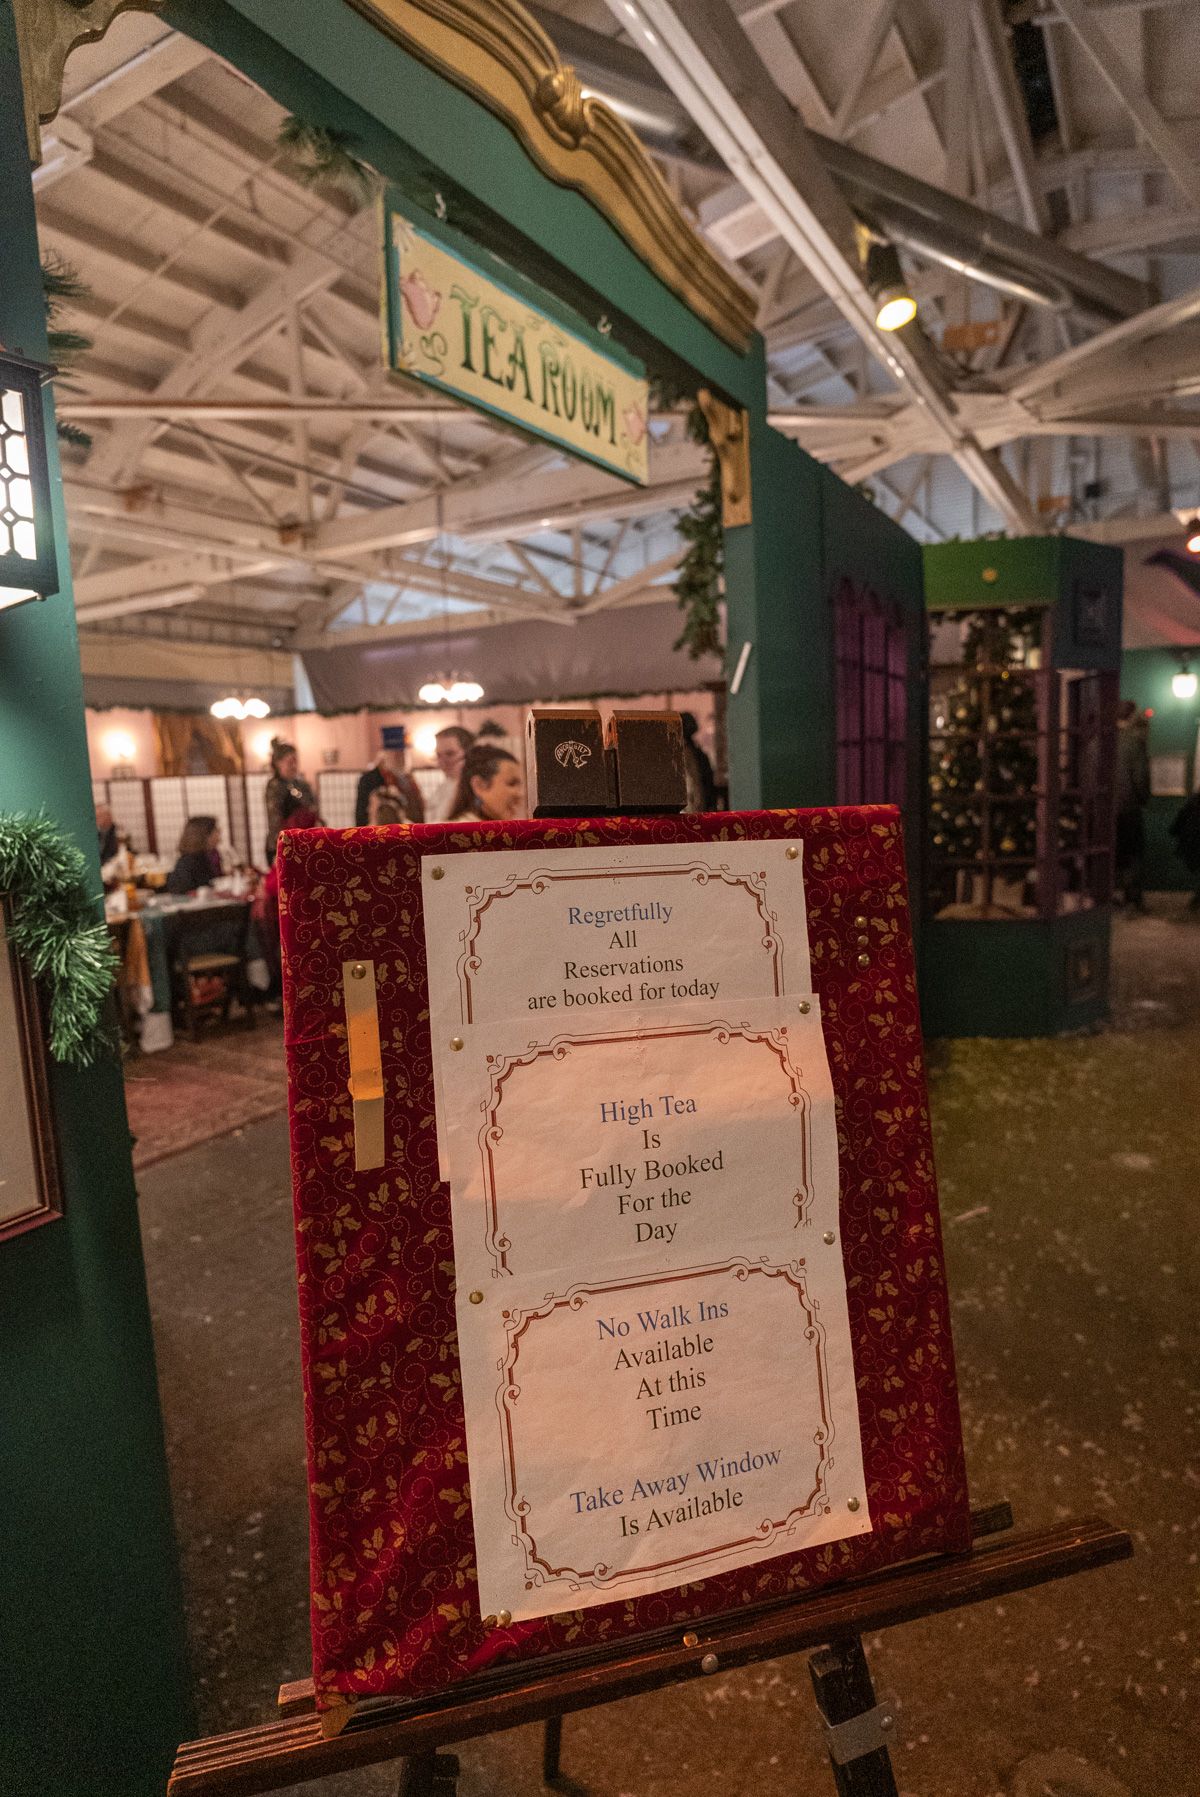 A sign advertising high tea options outside a green booth with a hand-painted sign that reads "Tea Room."